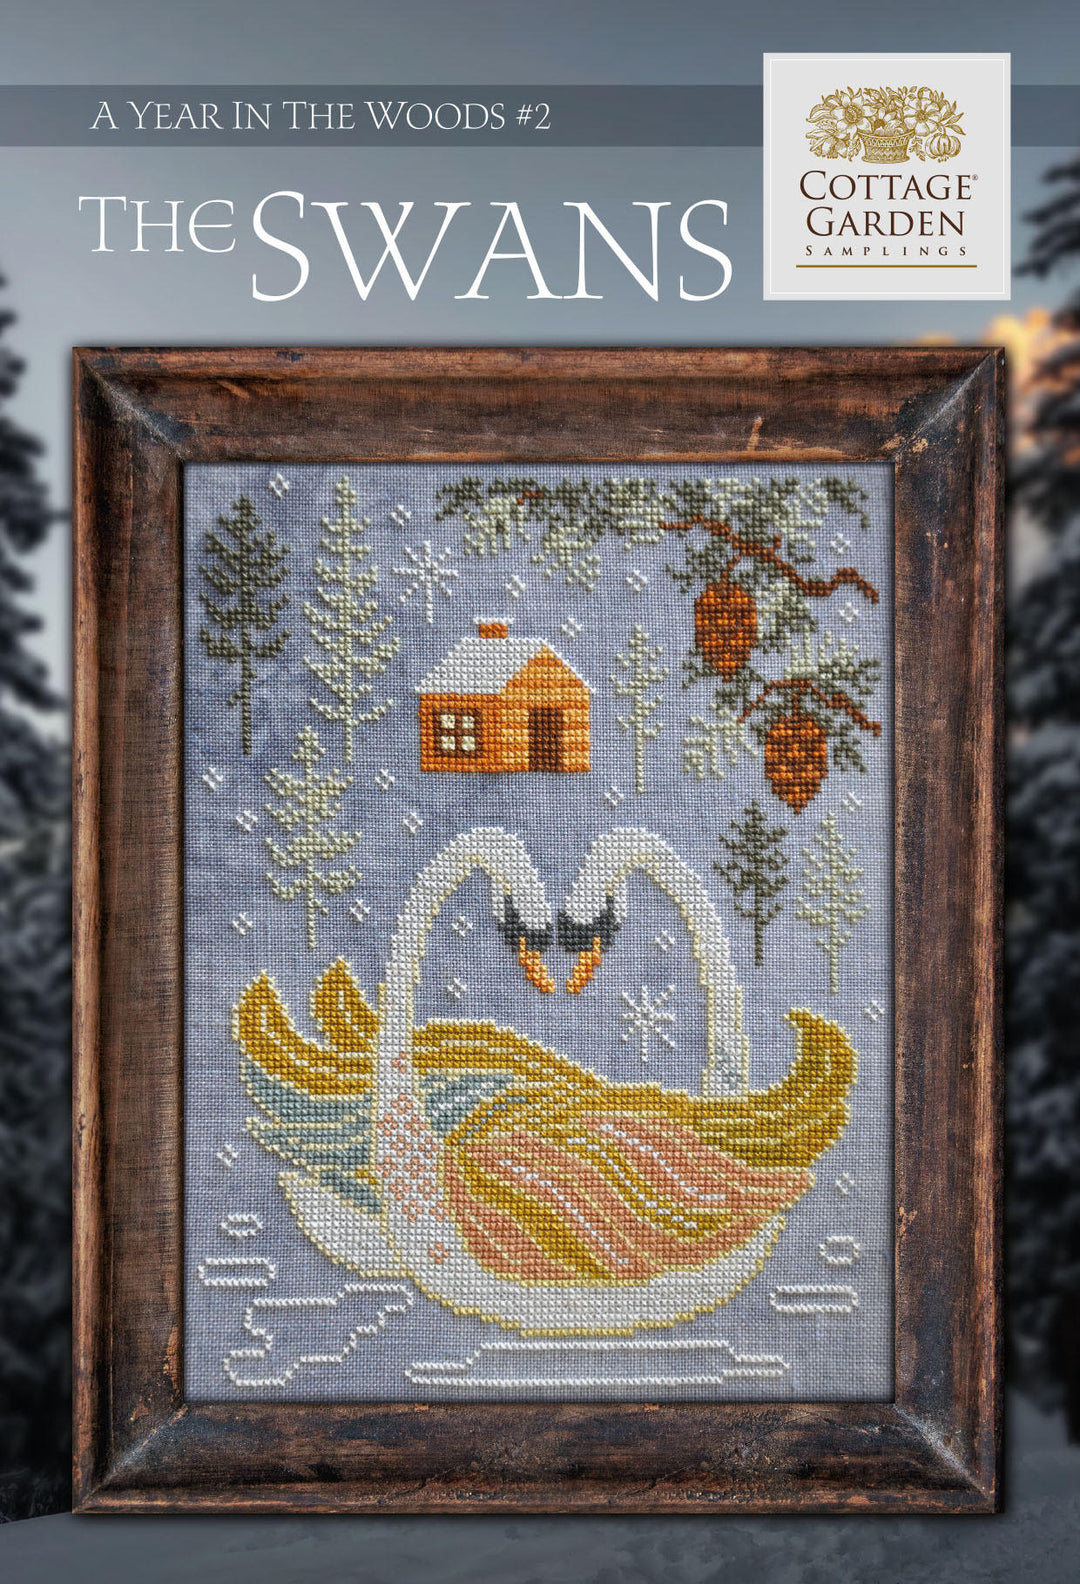 The Swans, A Year in the Woods #2 | Cottage Garden Samplings